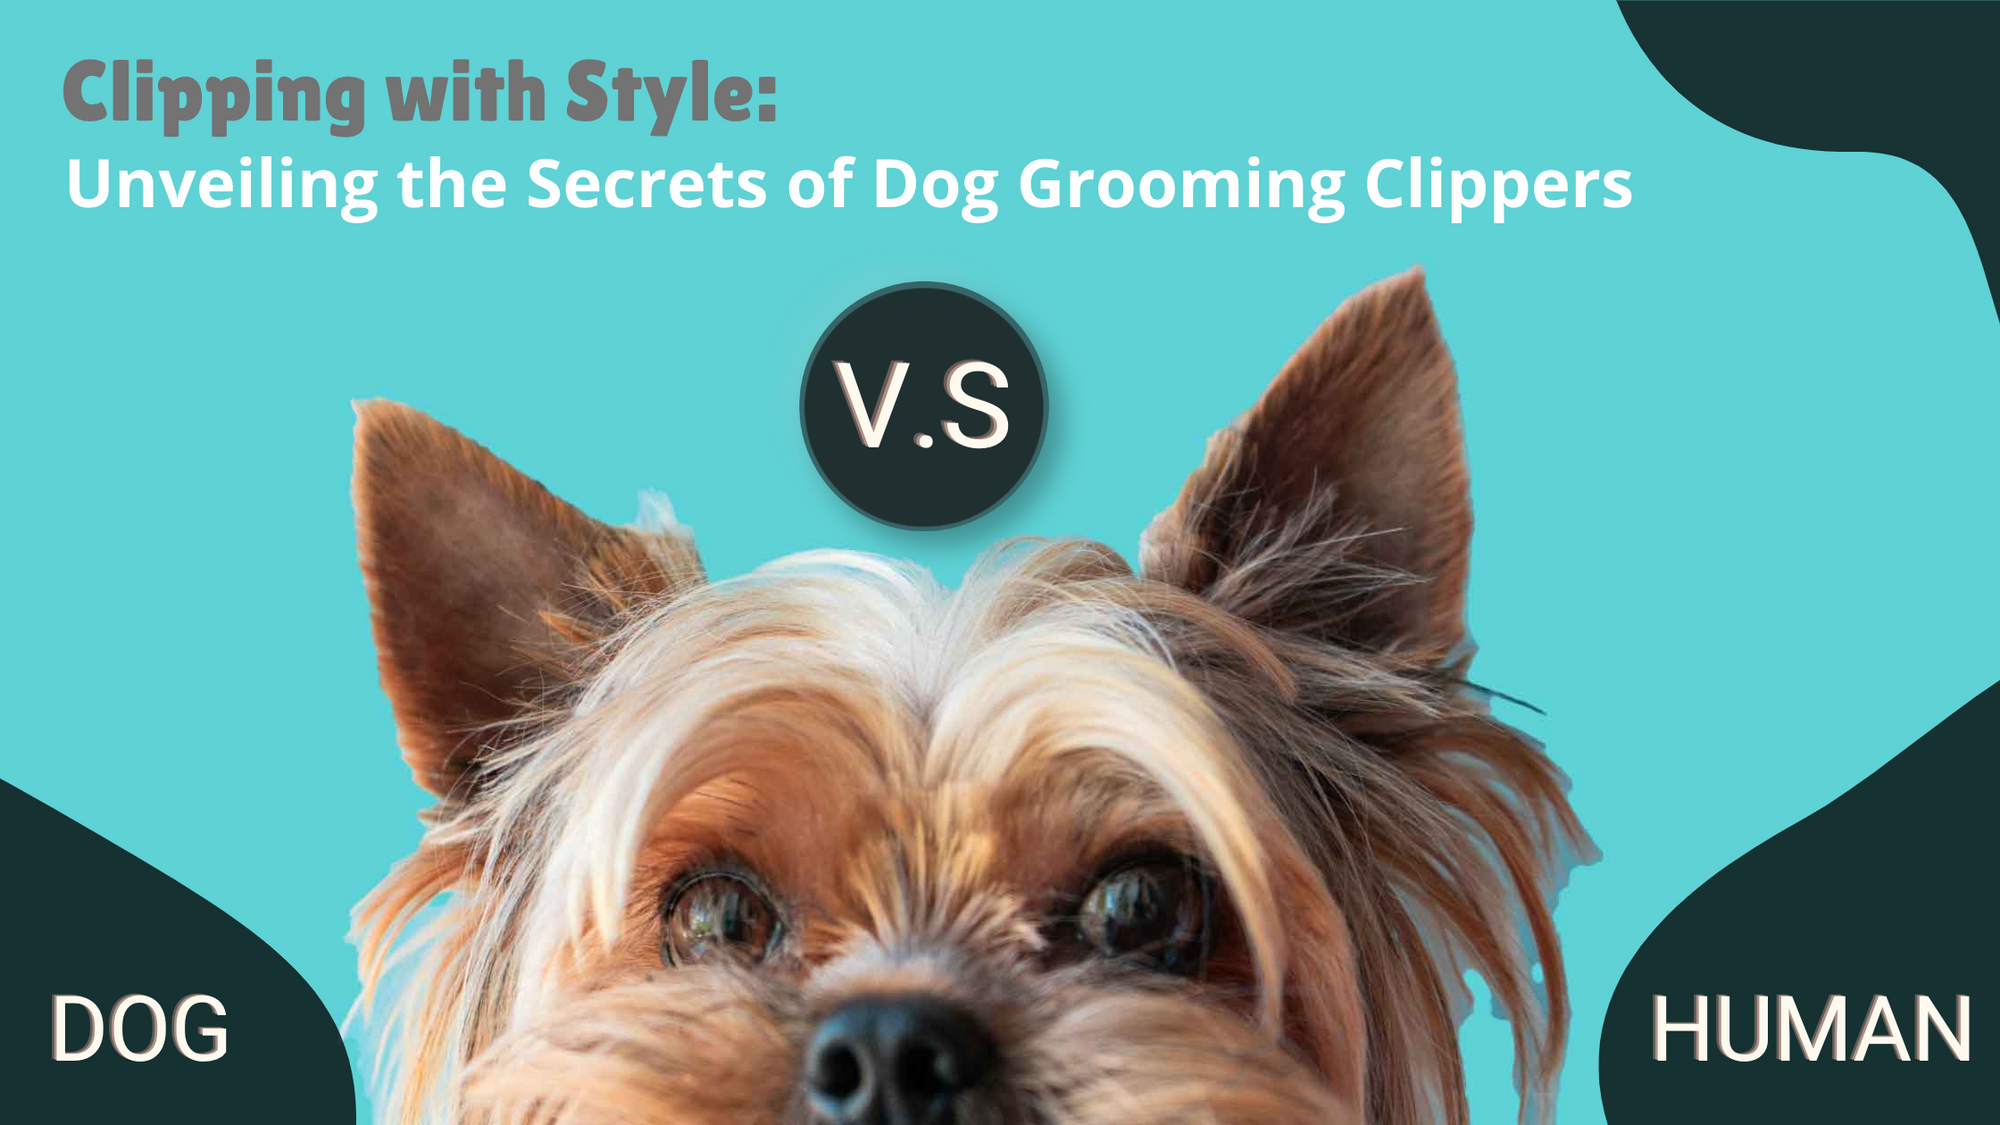 Clipping with Style: Unveiling the Secrets of Dog Grooming Clippers